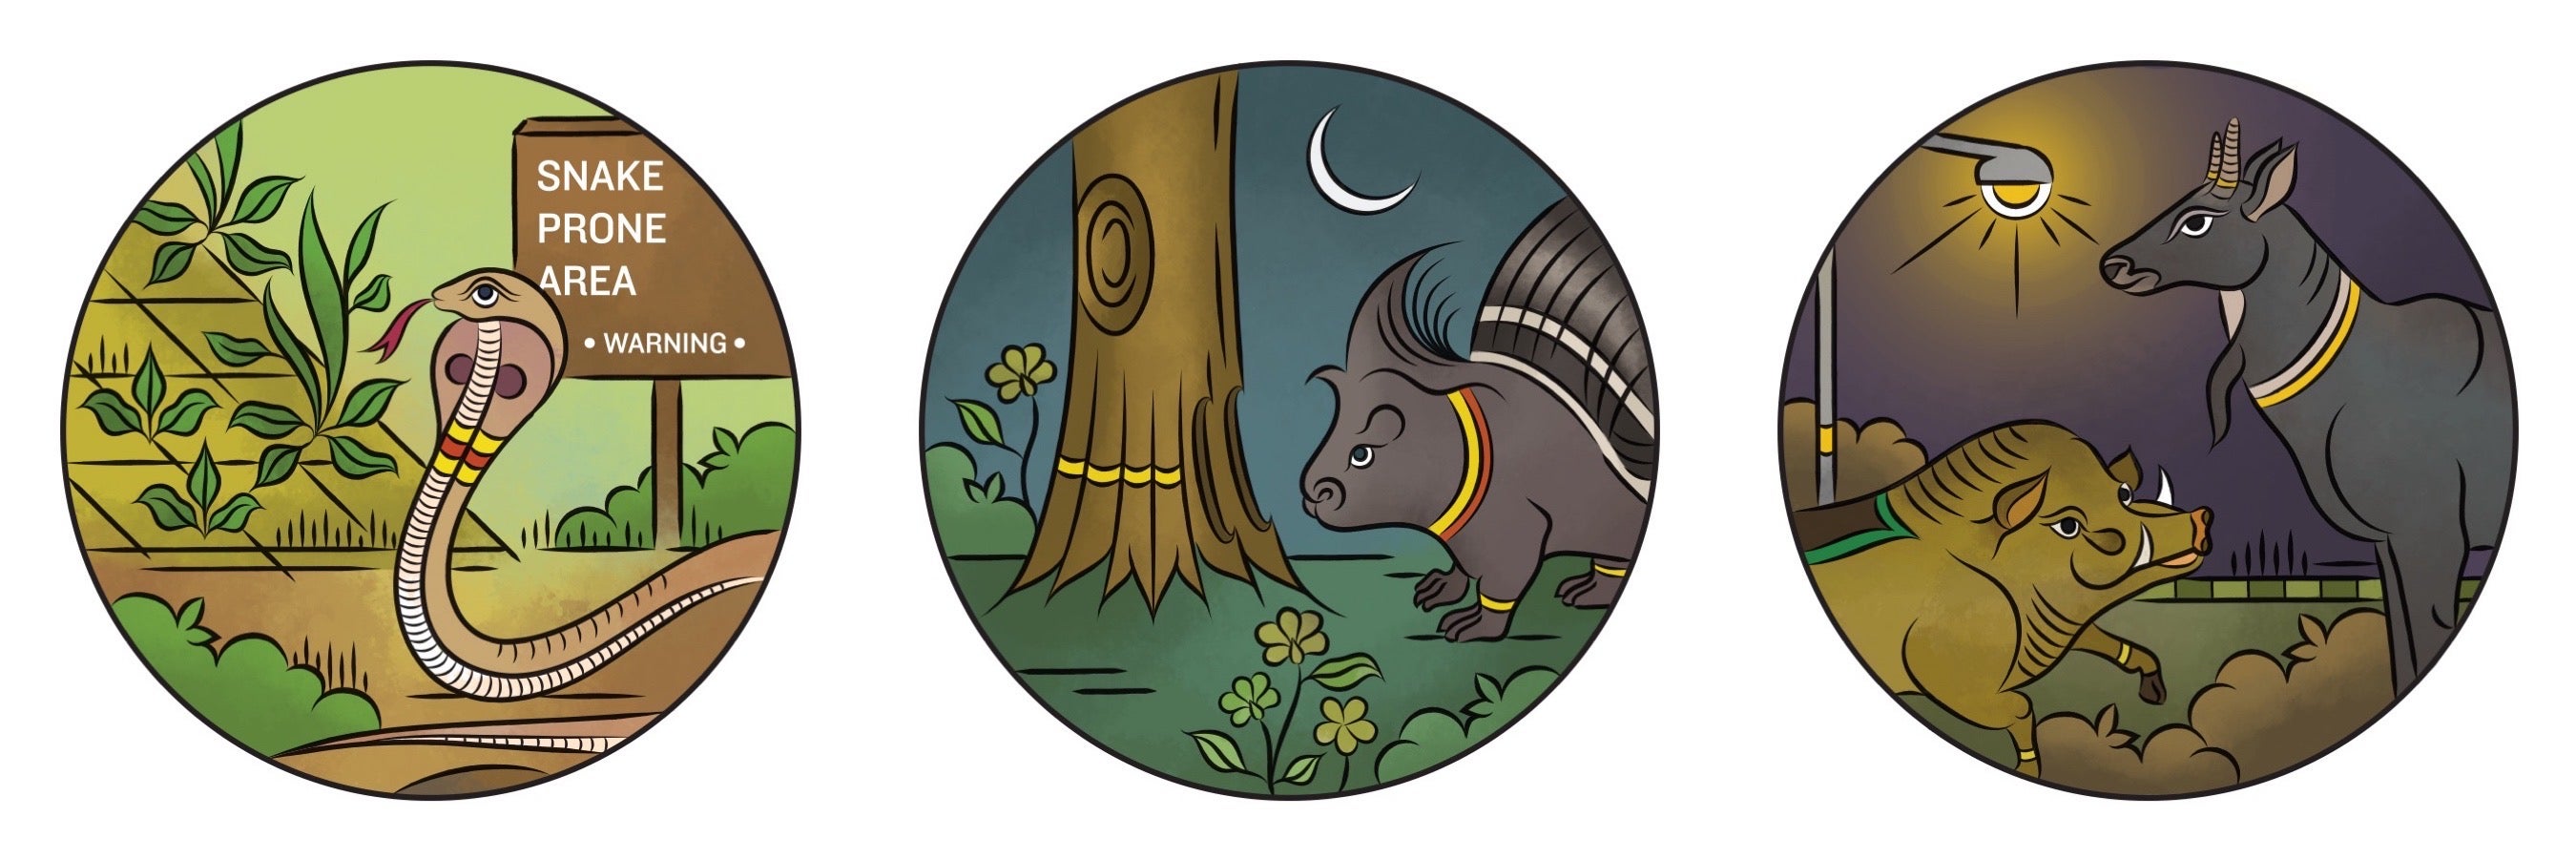 Illustrations of animals in the style of folk art, including a cobra, porcupine, boar and nilgai.